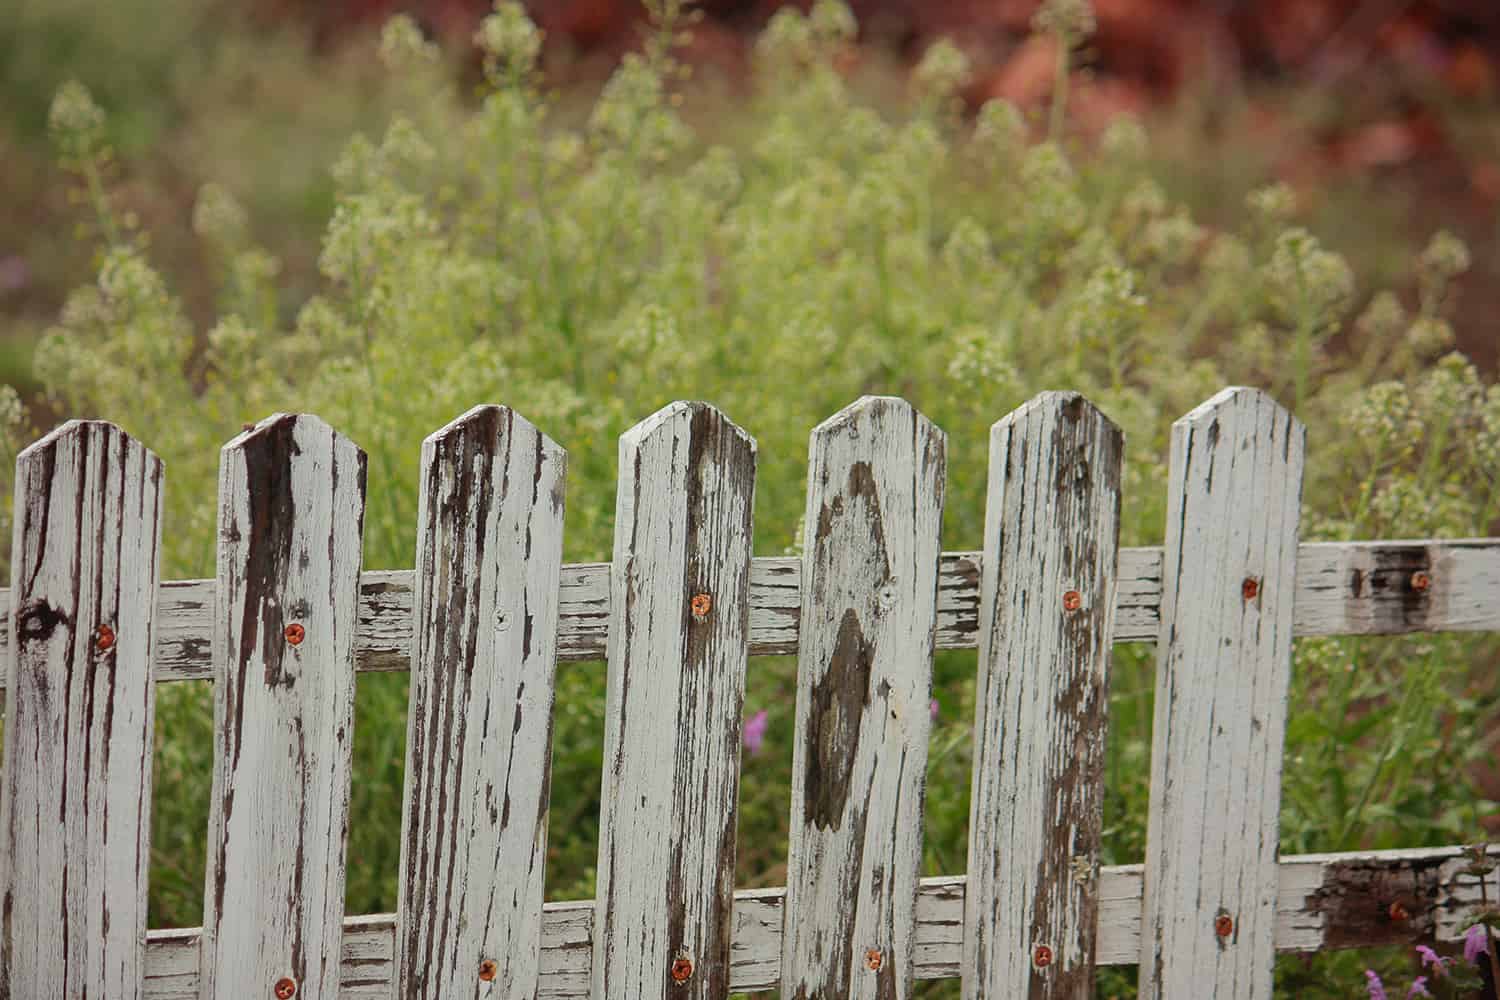 Worn out white picket fence.